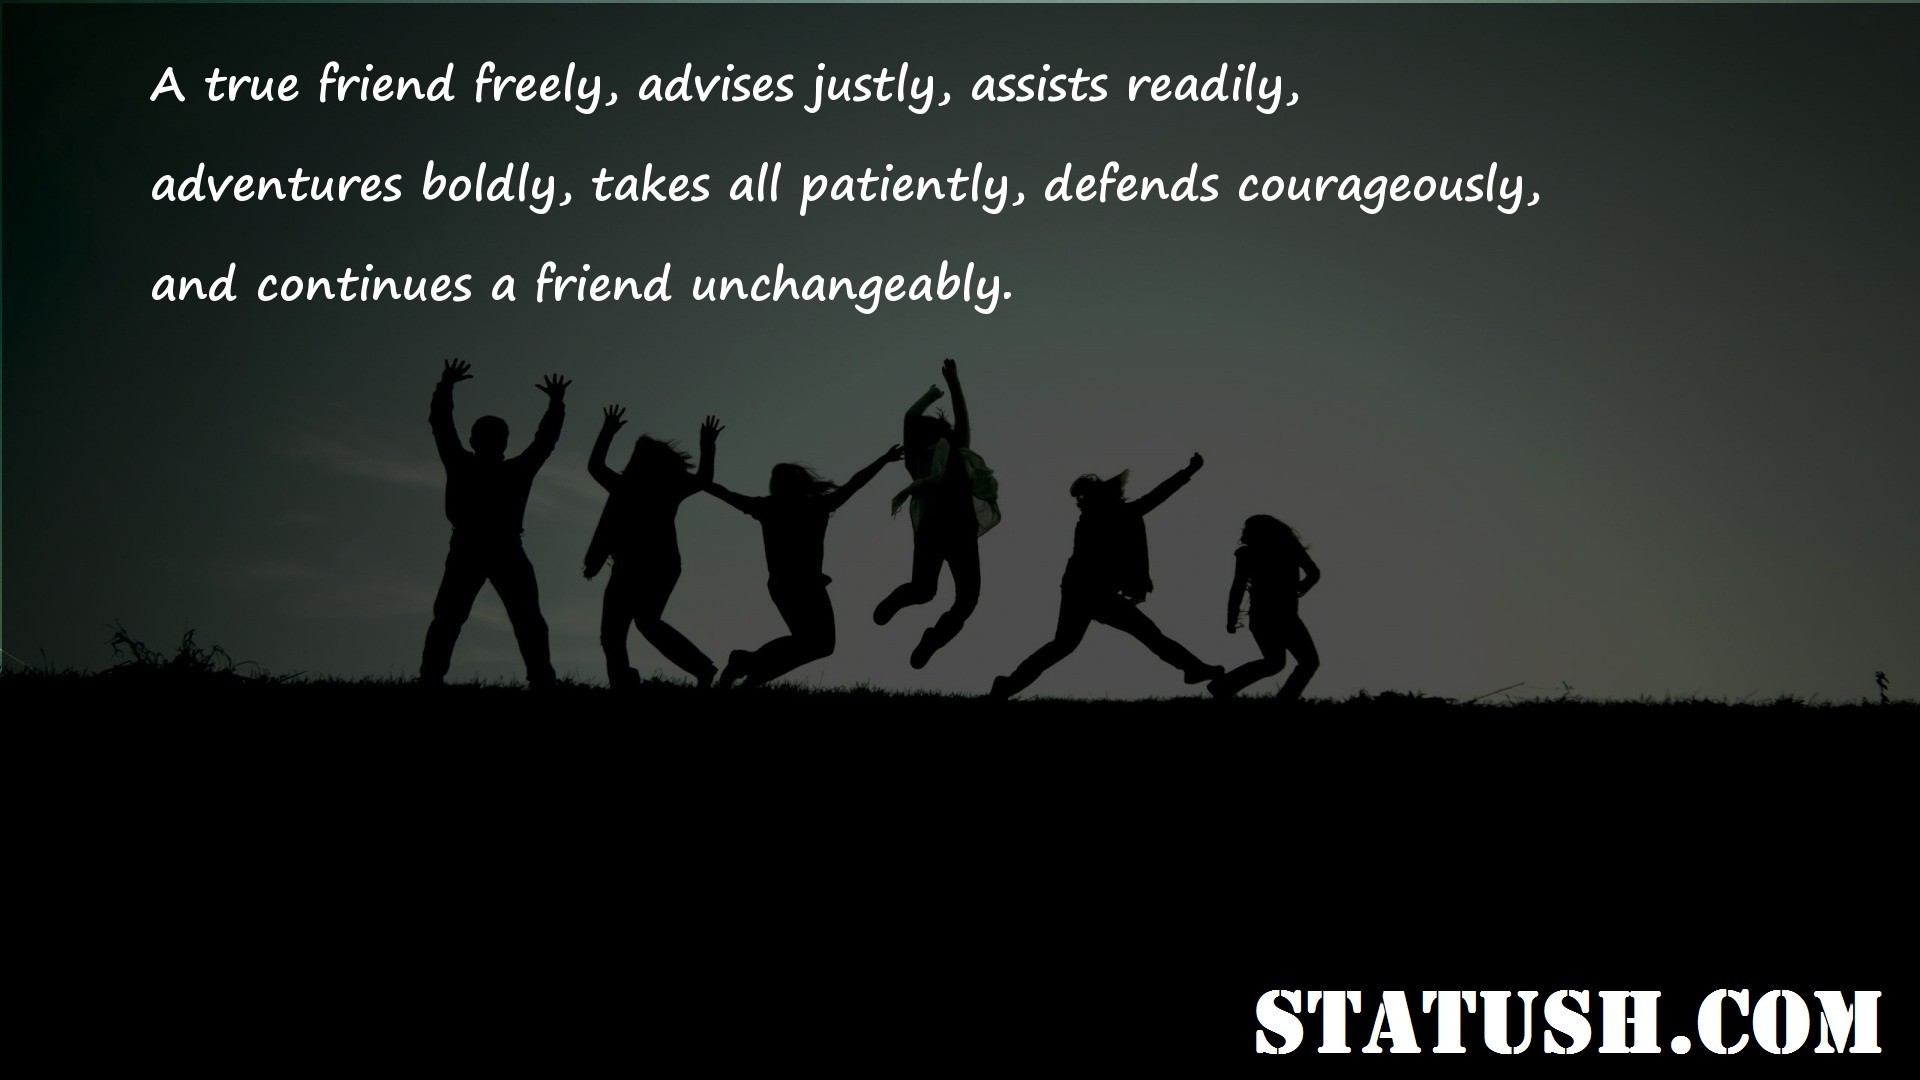 A true friend freely advises justly assists readily Friendship Quotes at statush.com